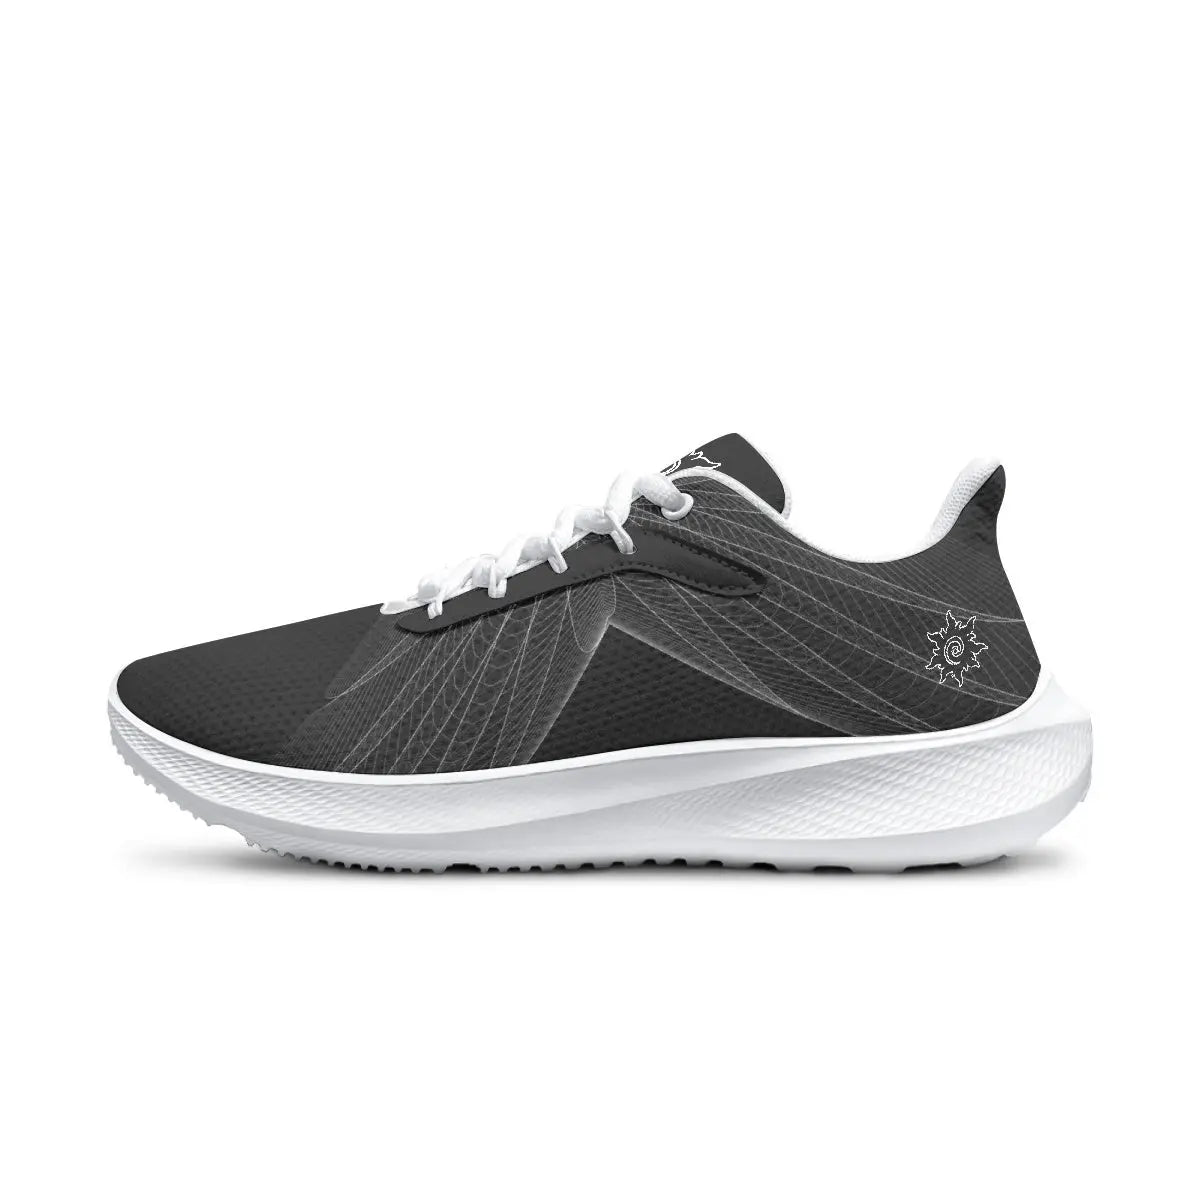 ActSun Running Shoes - Image #5